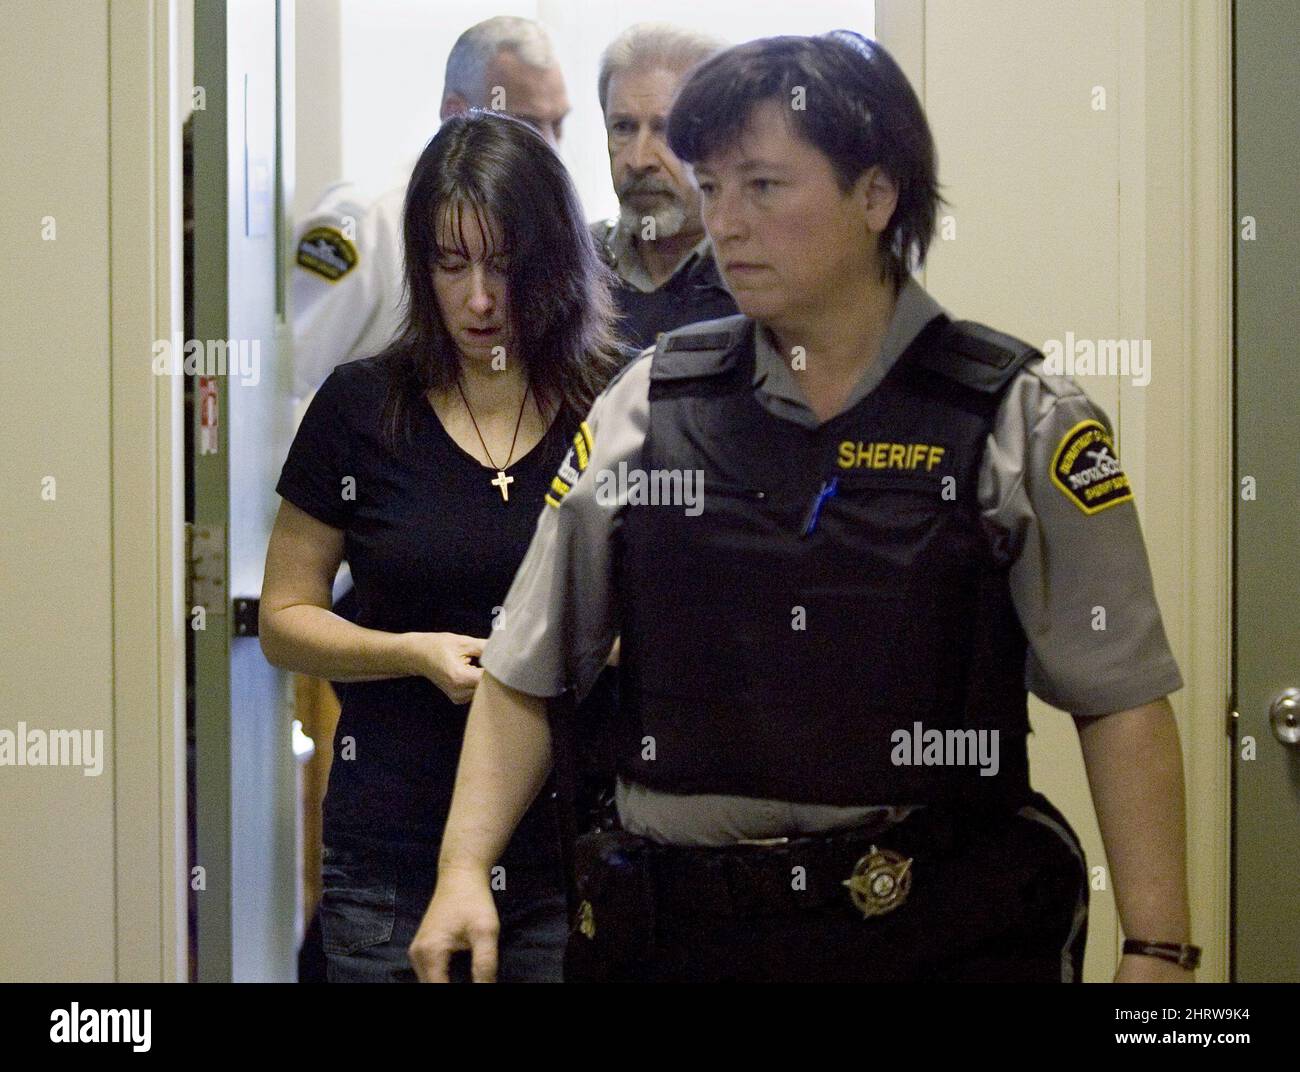 Penny Boudreau, left, heads from Supreme Court Supreme in Bridgewater, N.S. on Thursday, Dec. 4, 2008. Boudreau is charged with the first-degree murder of her 12-year-old daughter Karissa Boudreau. Stock Photo